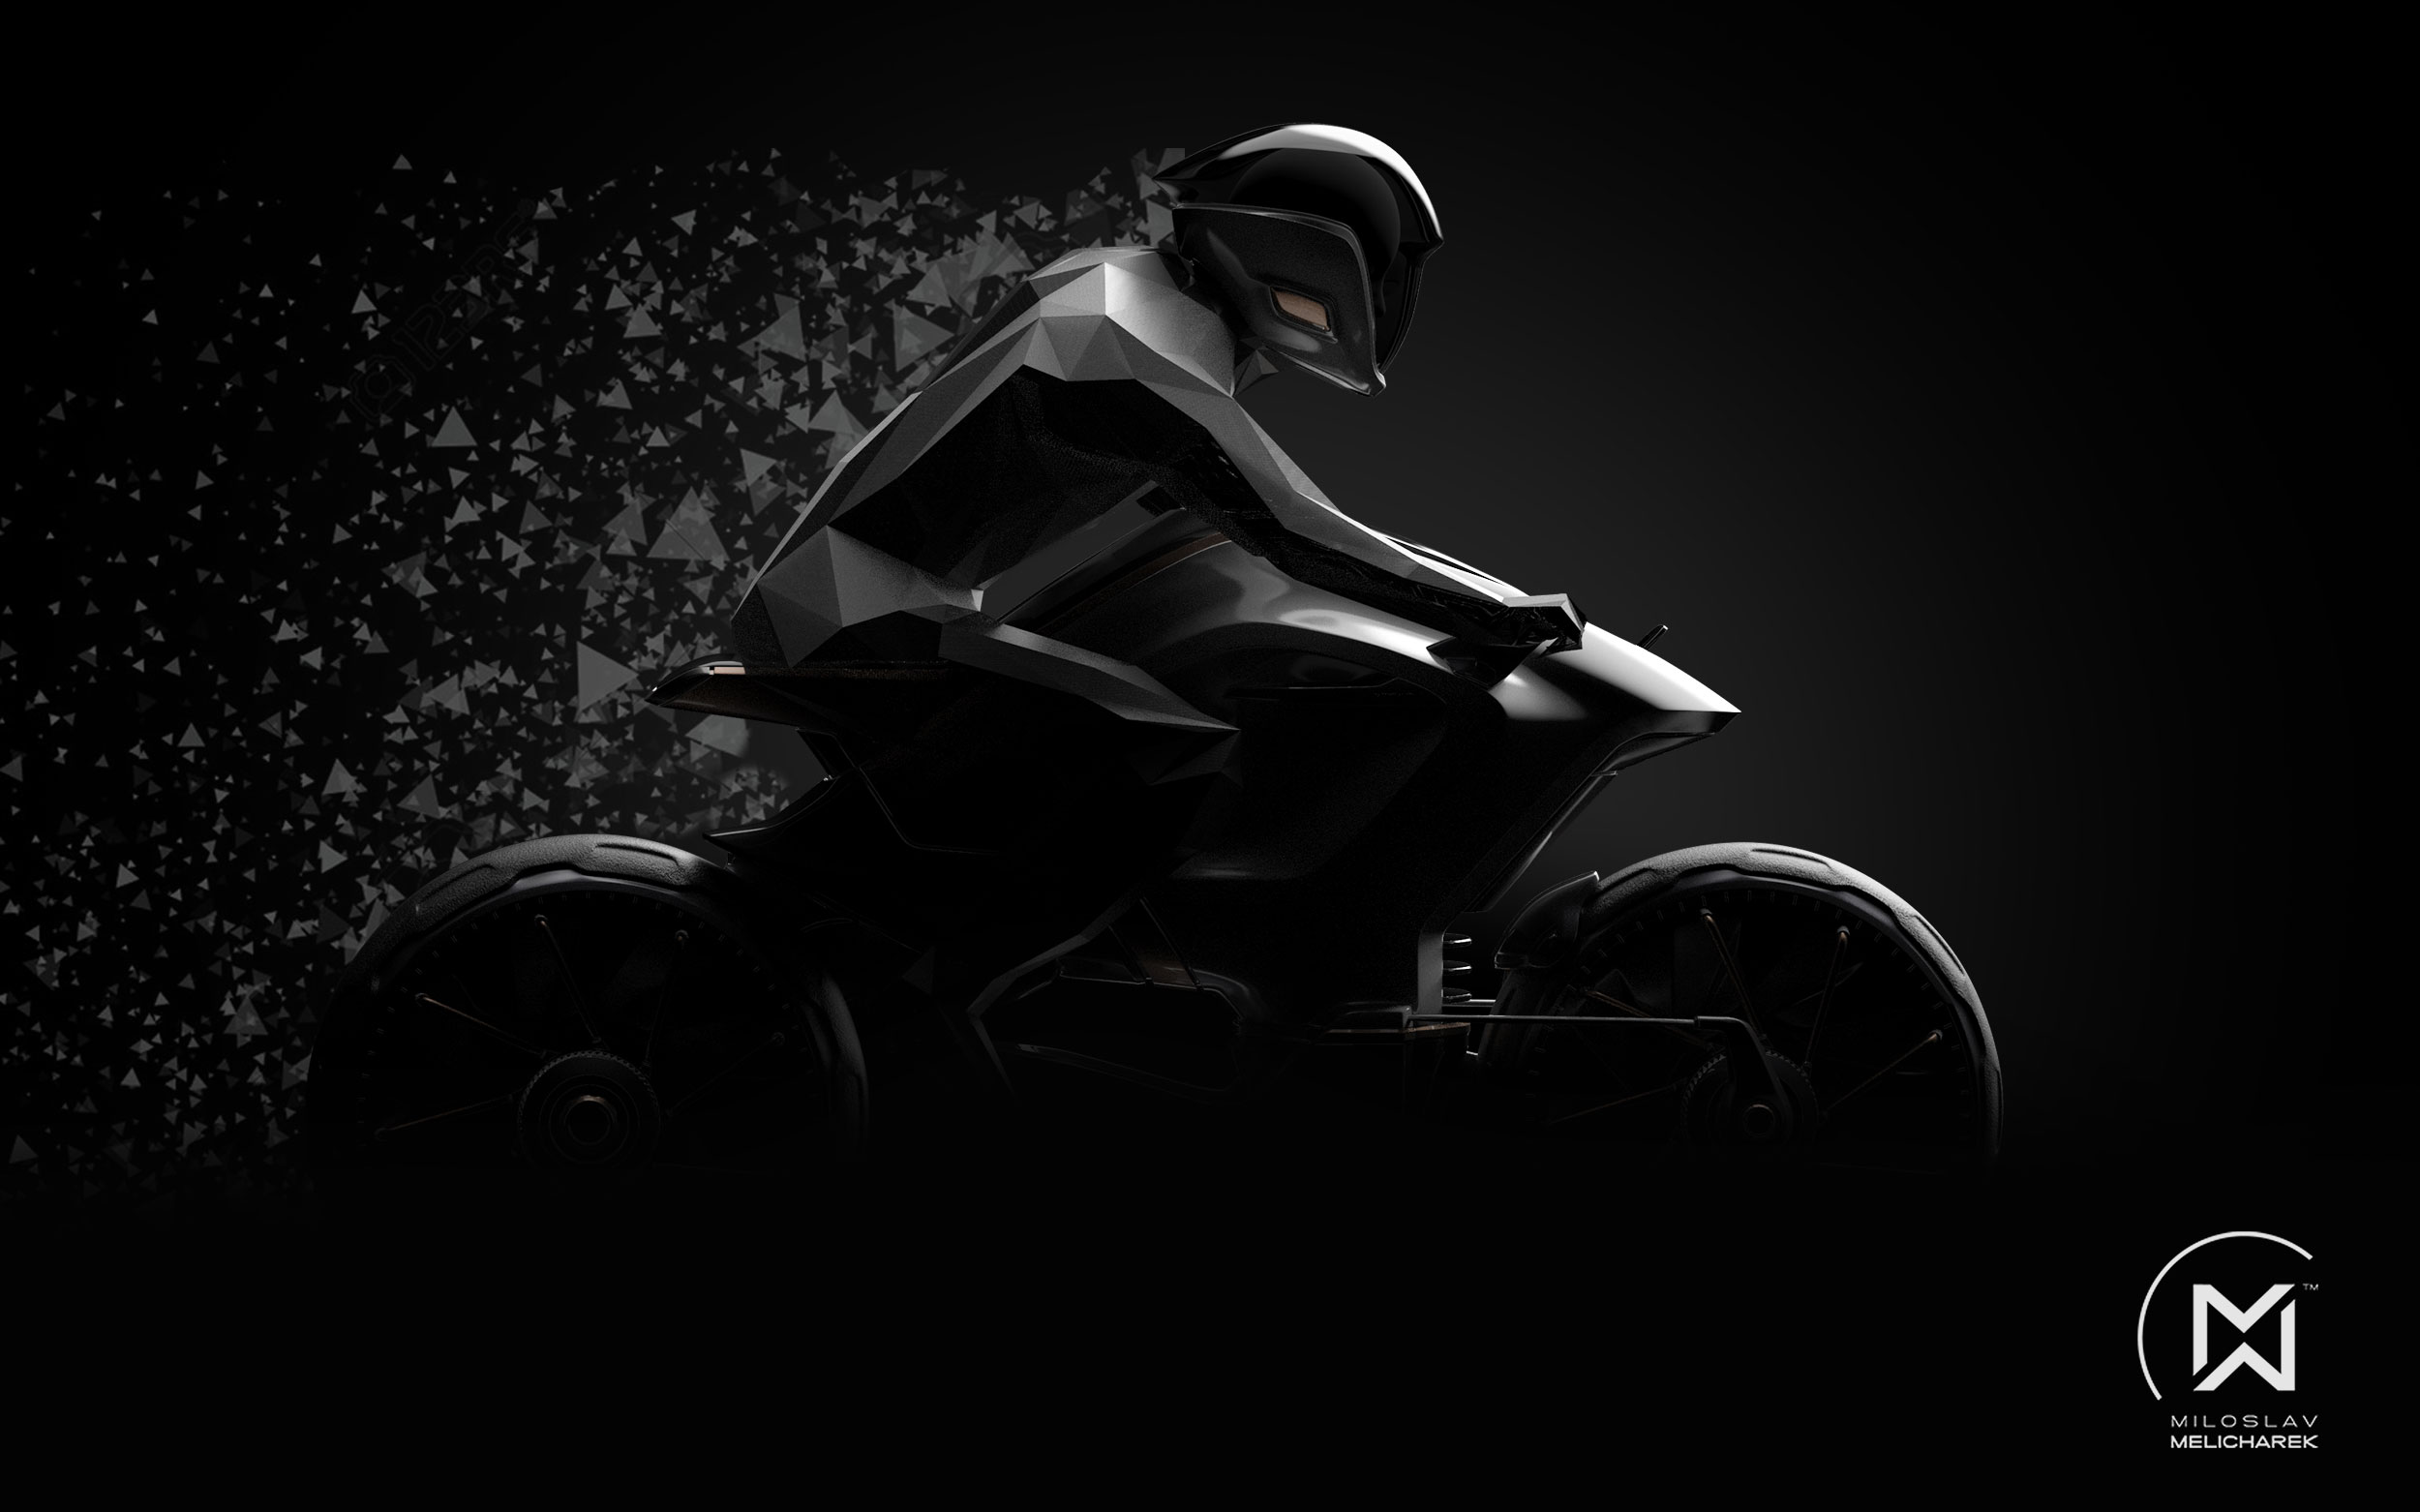 URBAQ – The motorcycle of the Future